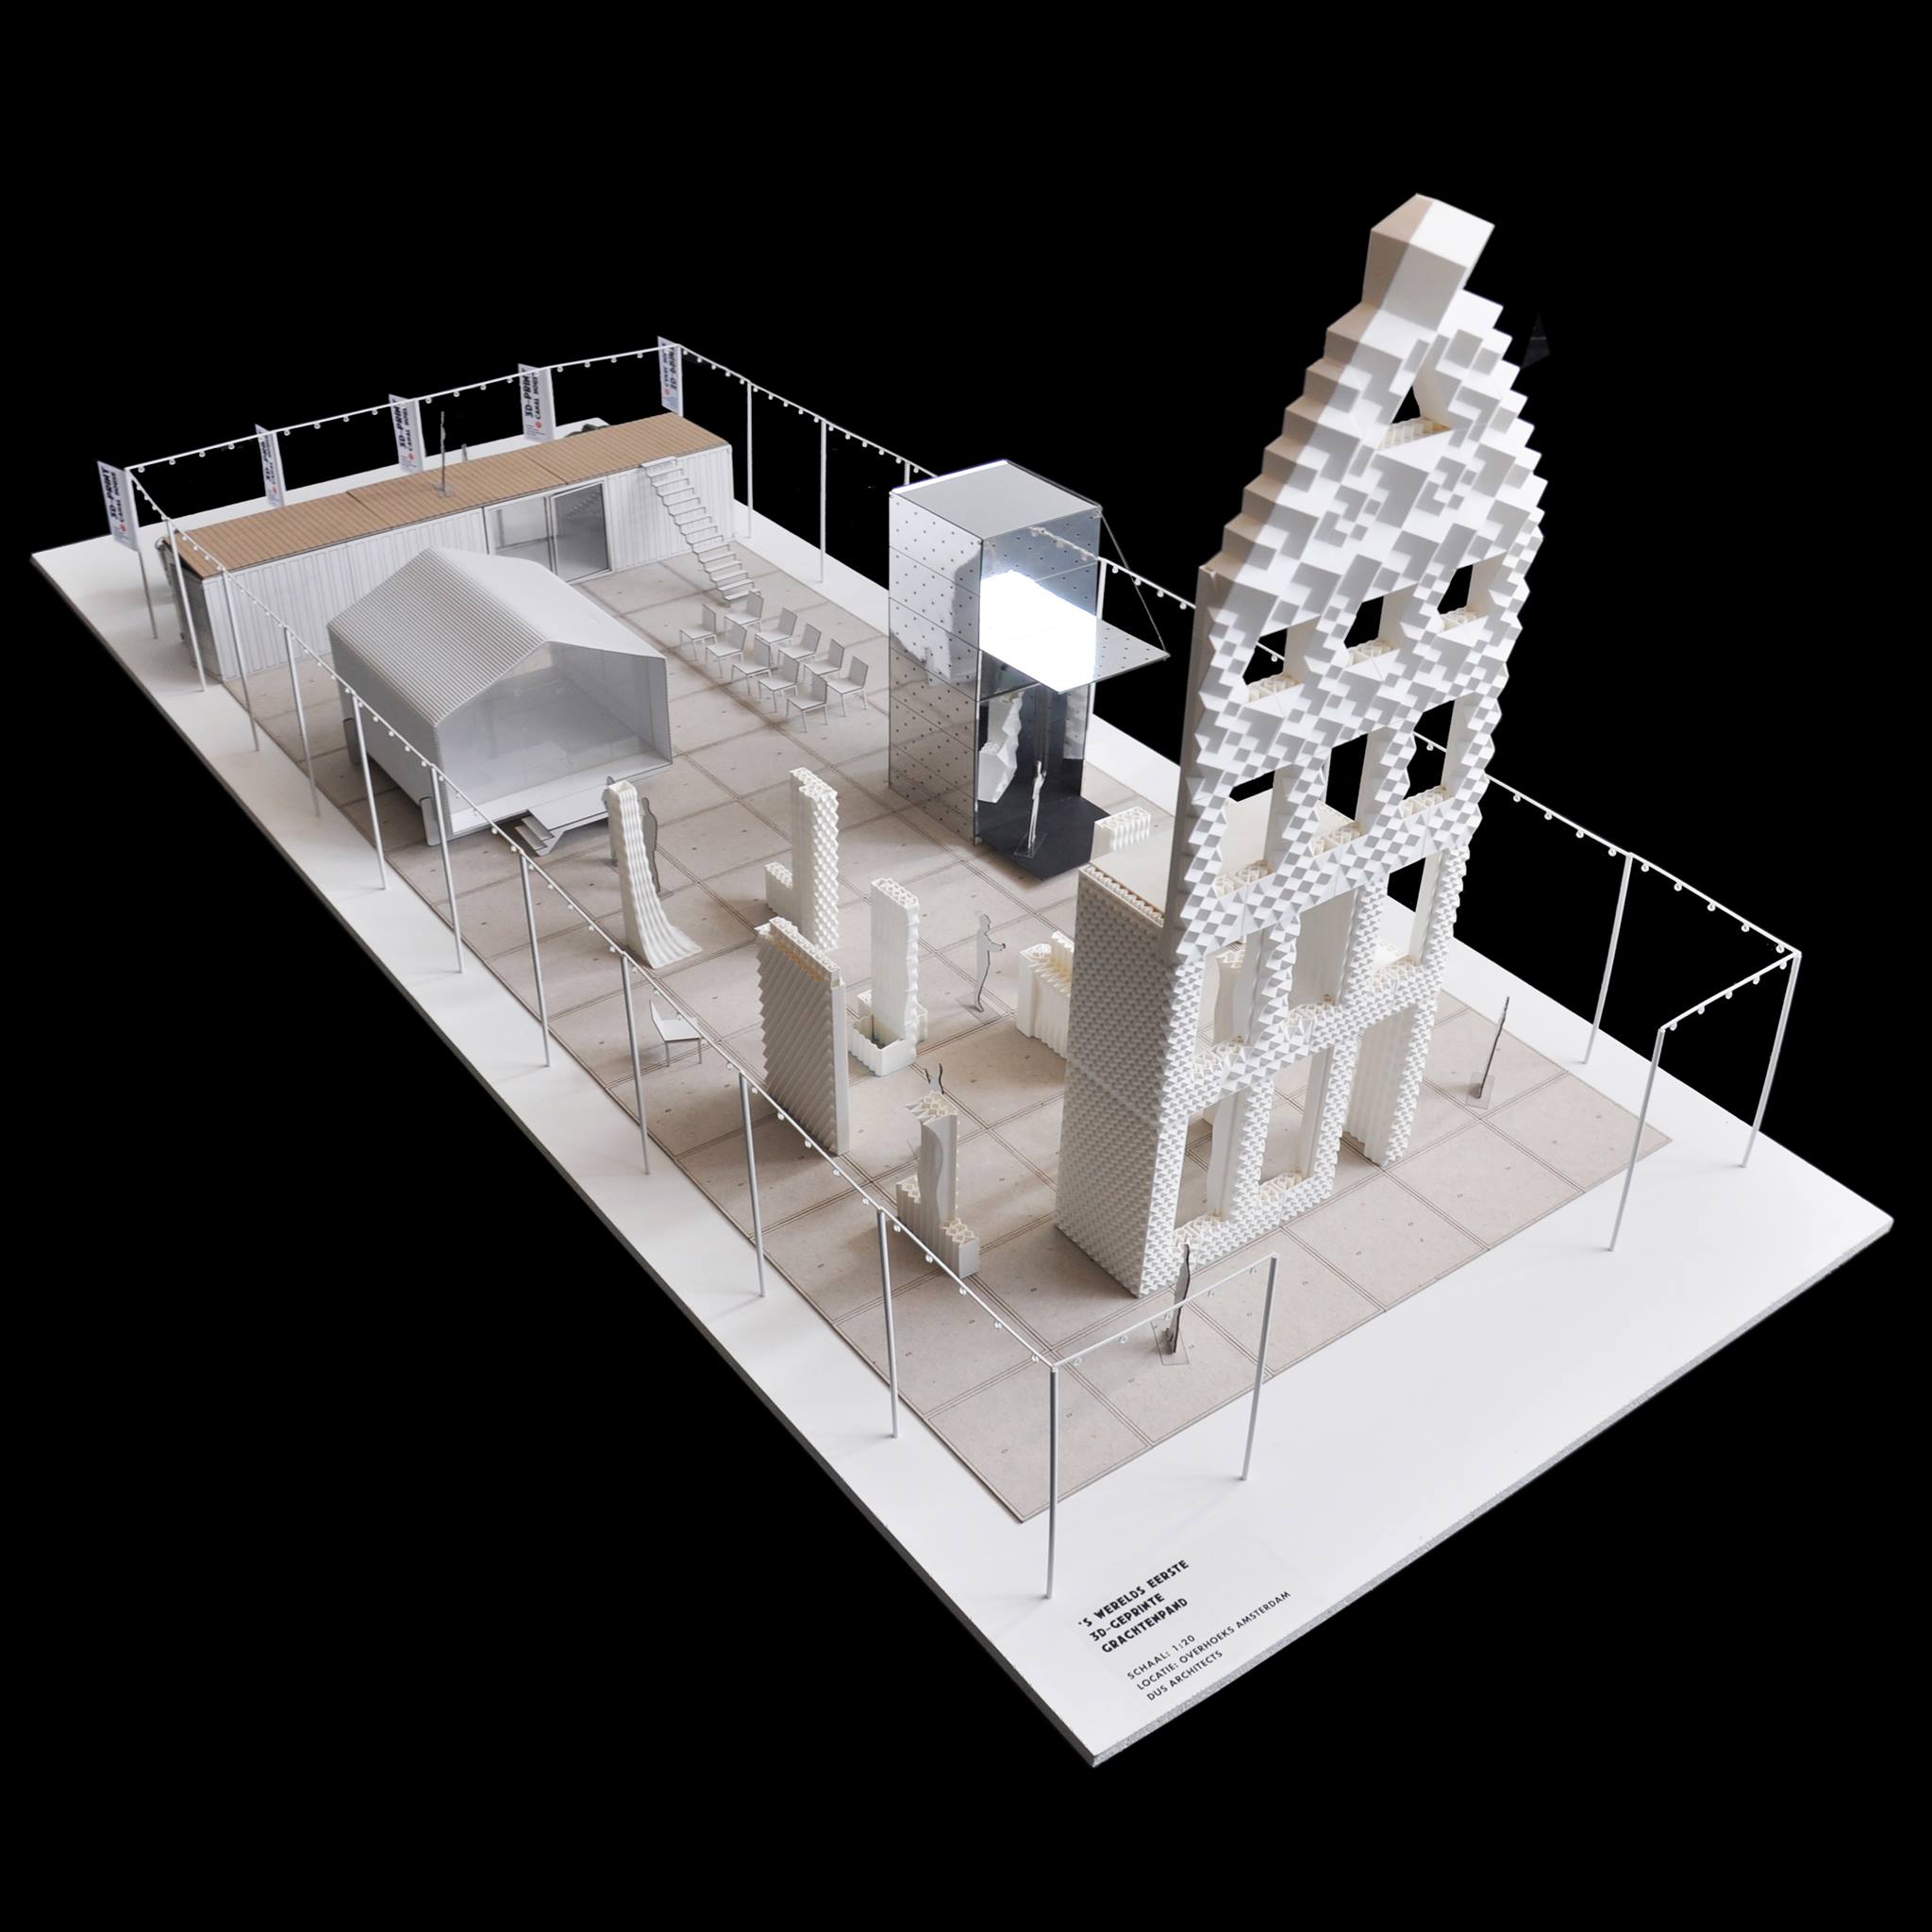 https://3dprintingindustry.com/wp-content/uploads/2016/10/Model-Structure-of-the-3D-Print-Canal-House-Amsterdam.jpg